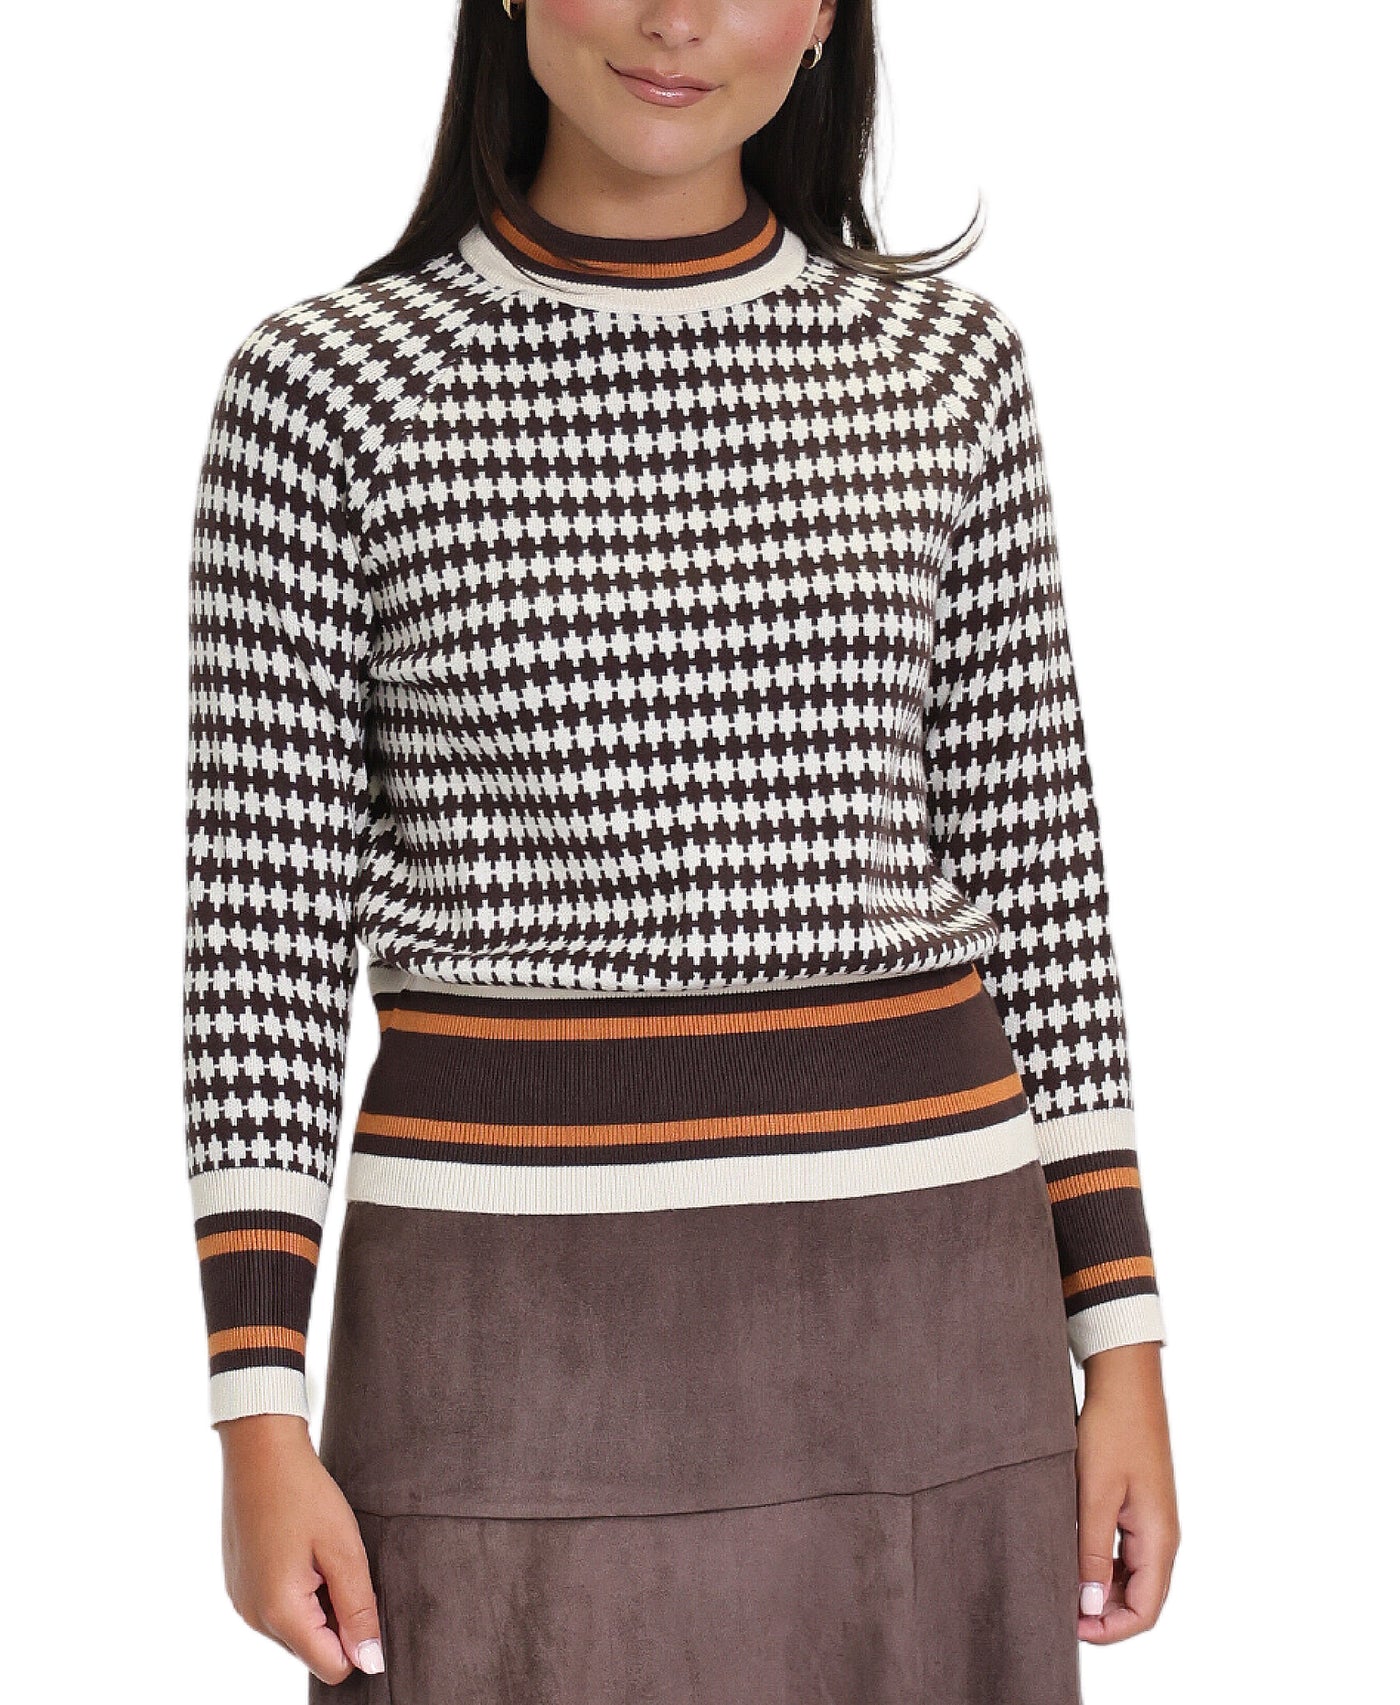 Houndstooth Sweater w/ Stripes image 1